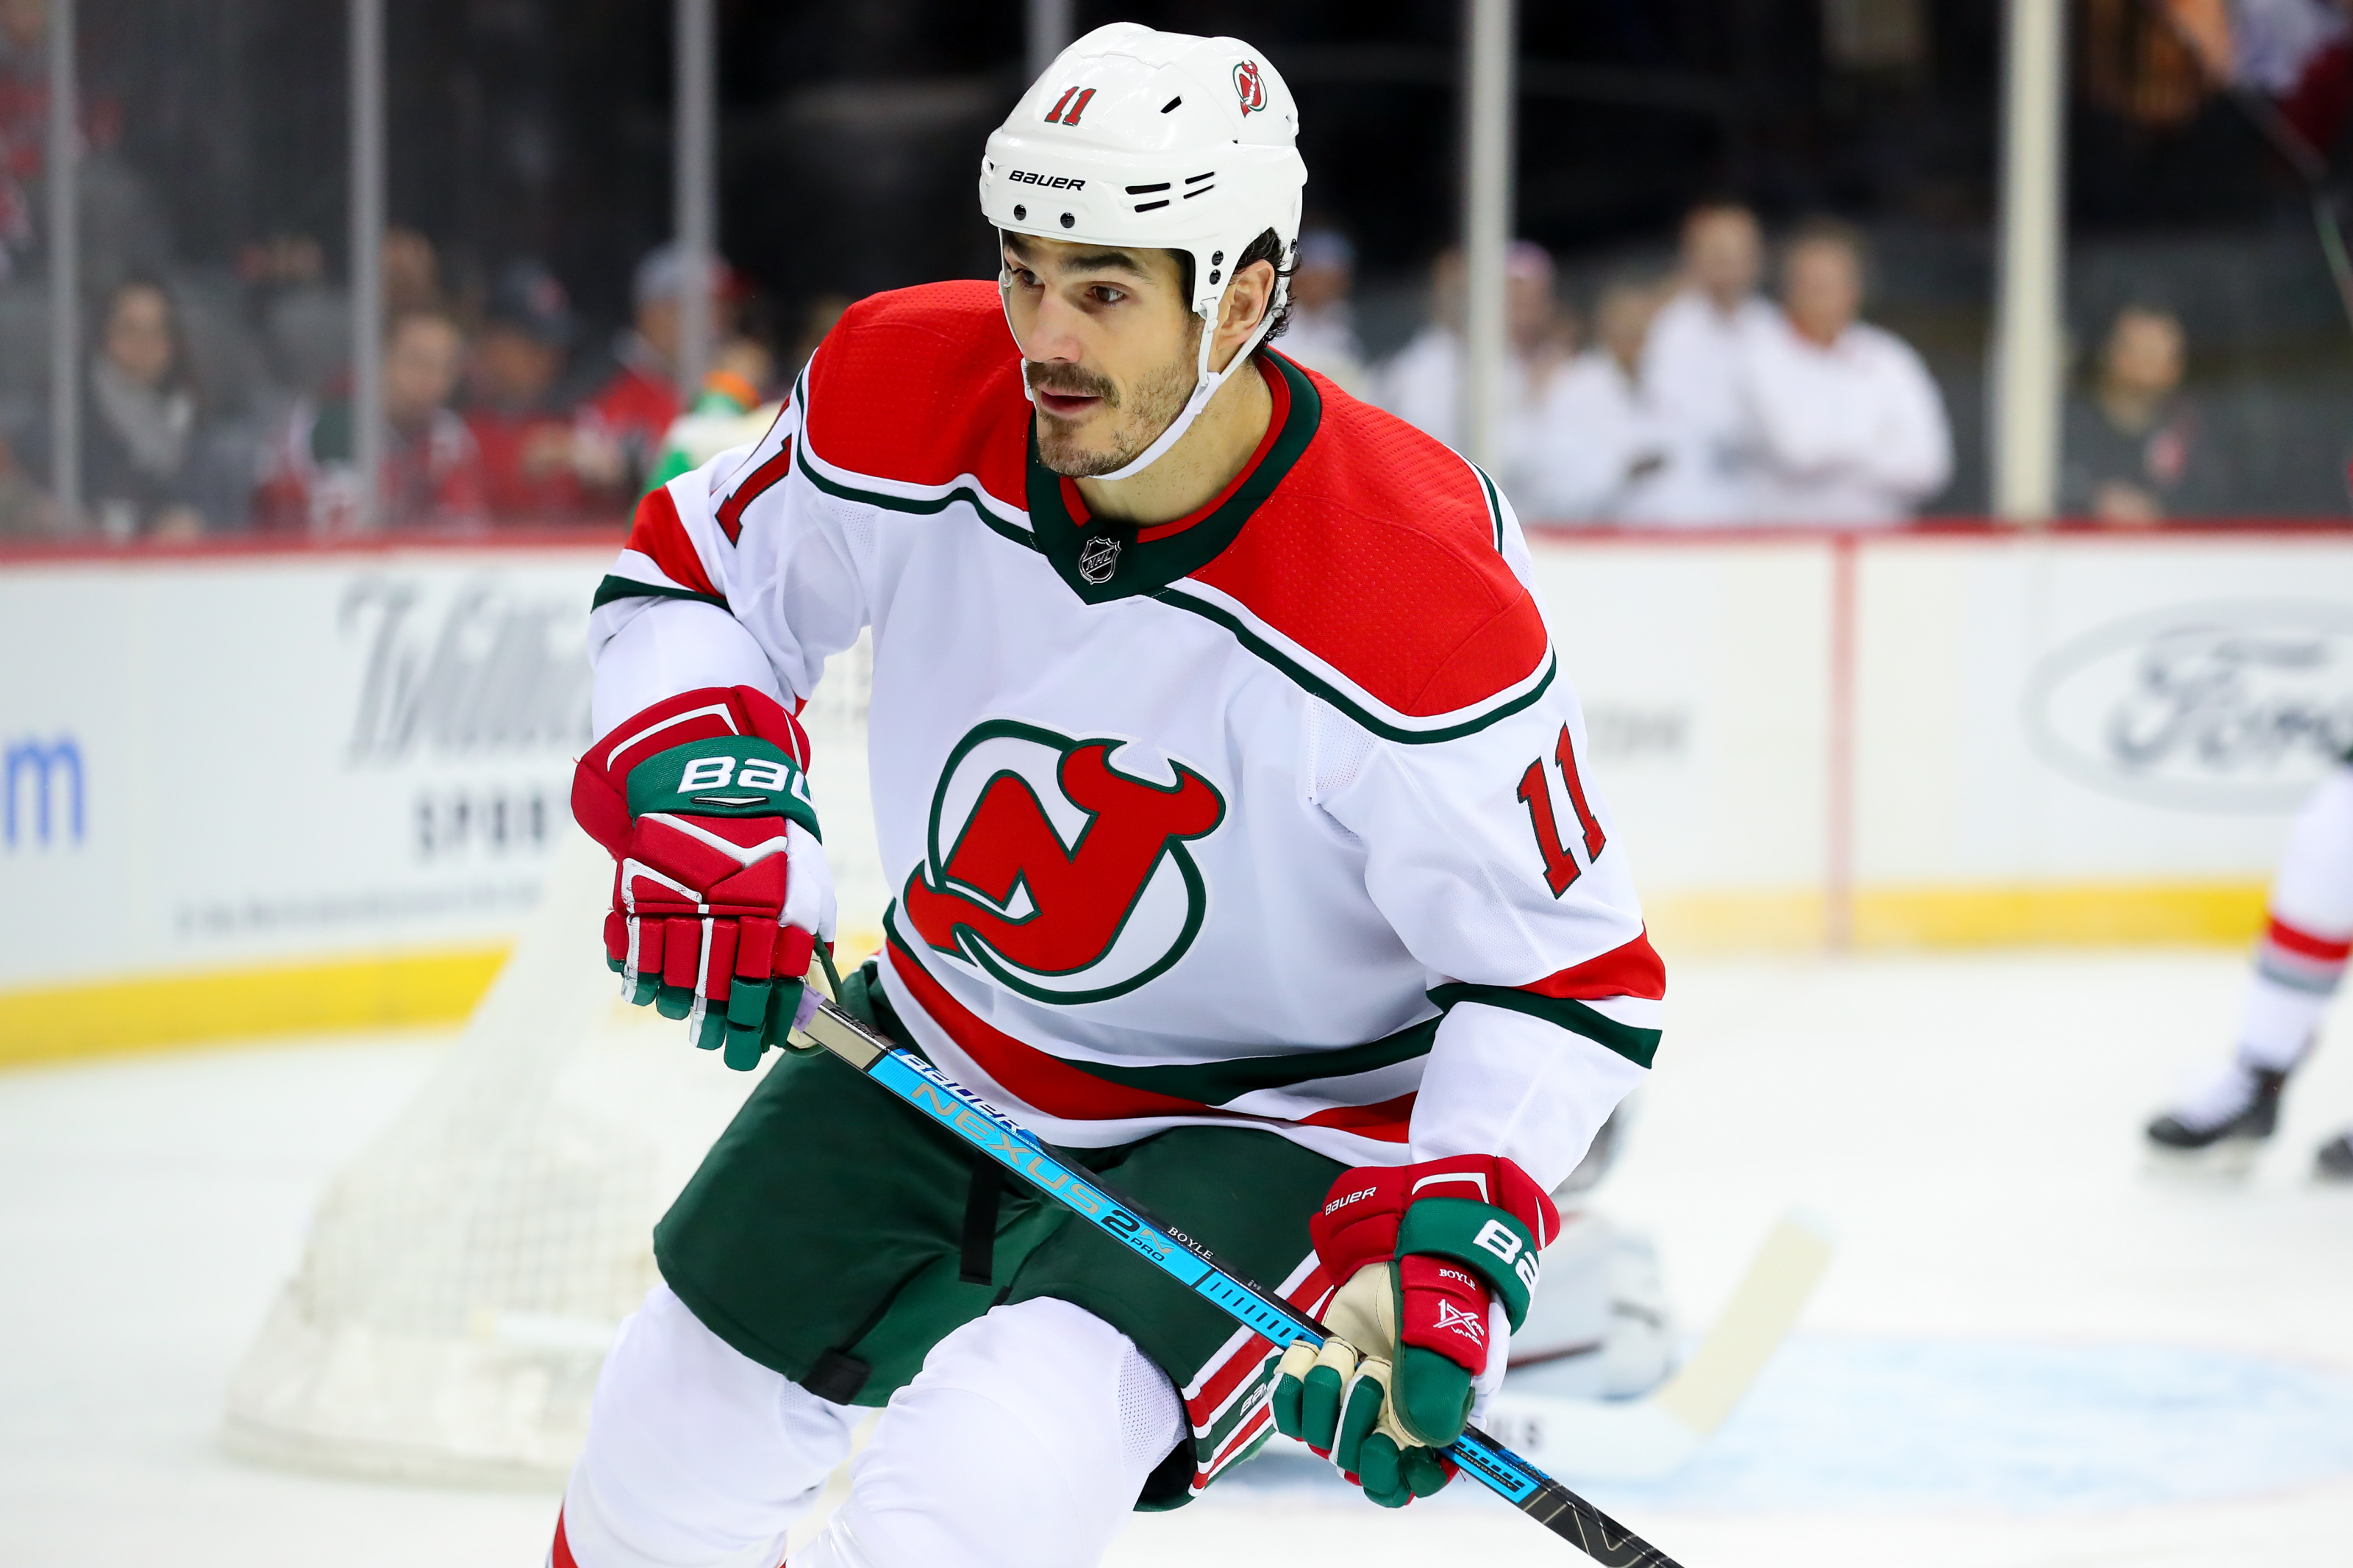 Devils' Boyle diagnosed with cancer, expects to keep playing